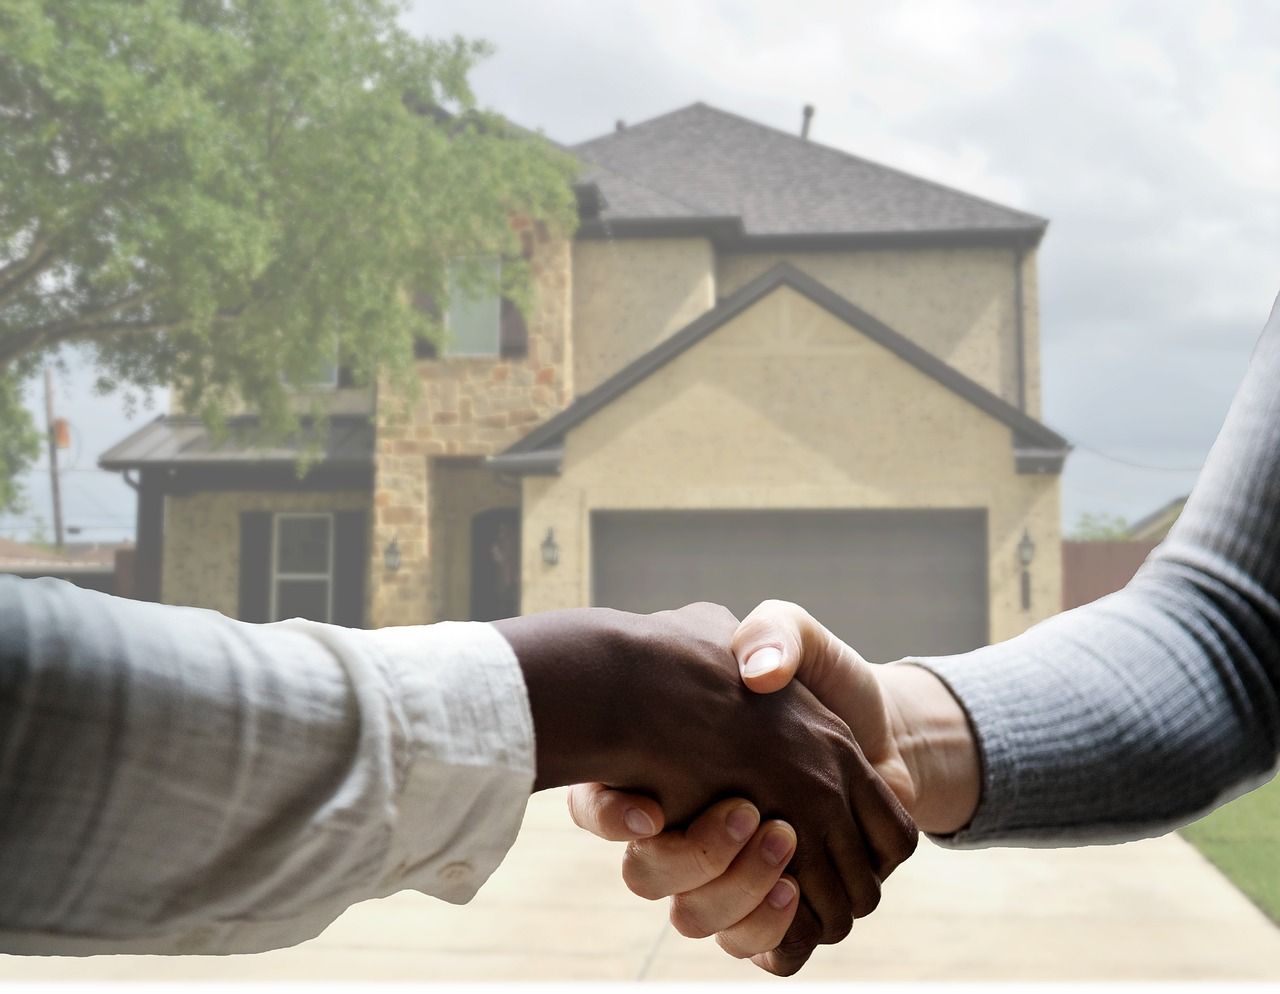 5 Necessary First-Time House Buyers Tips To Consider